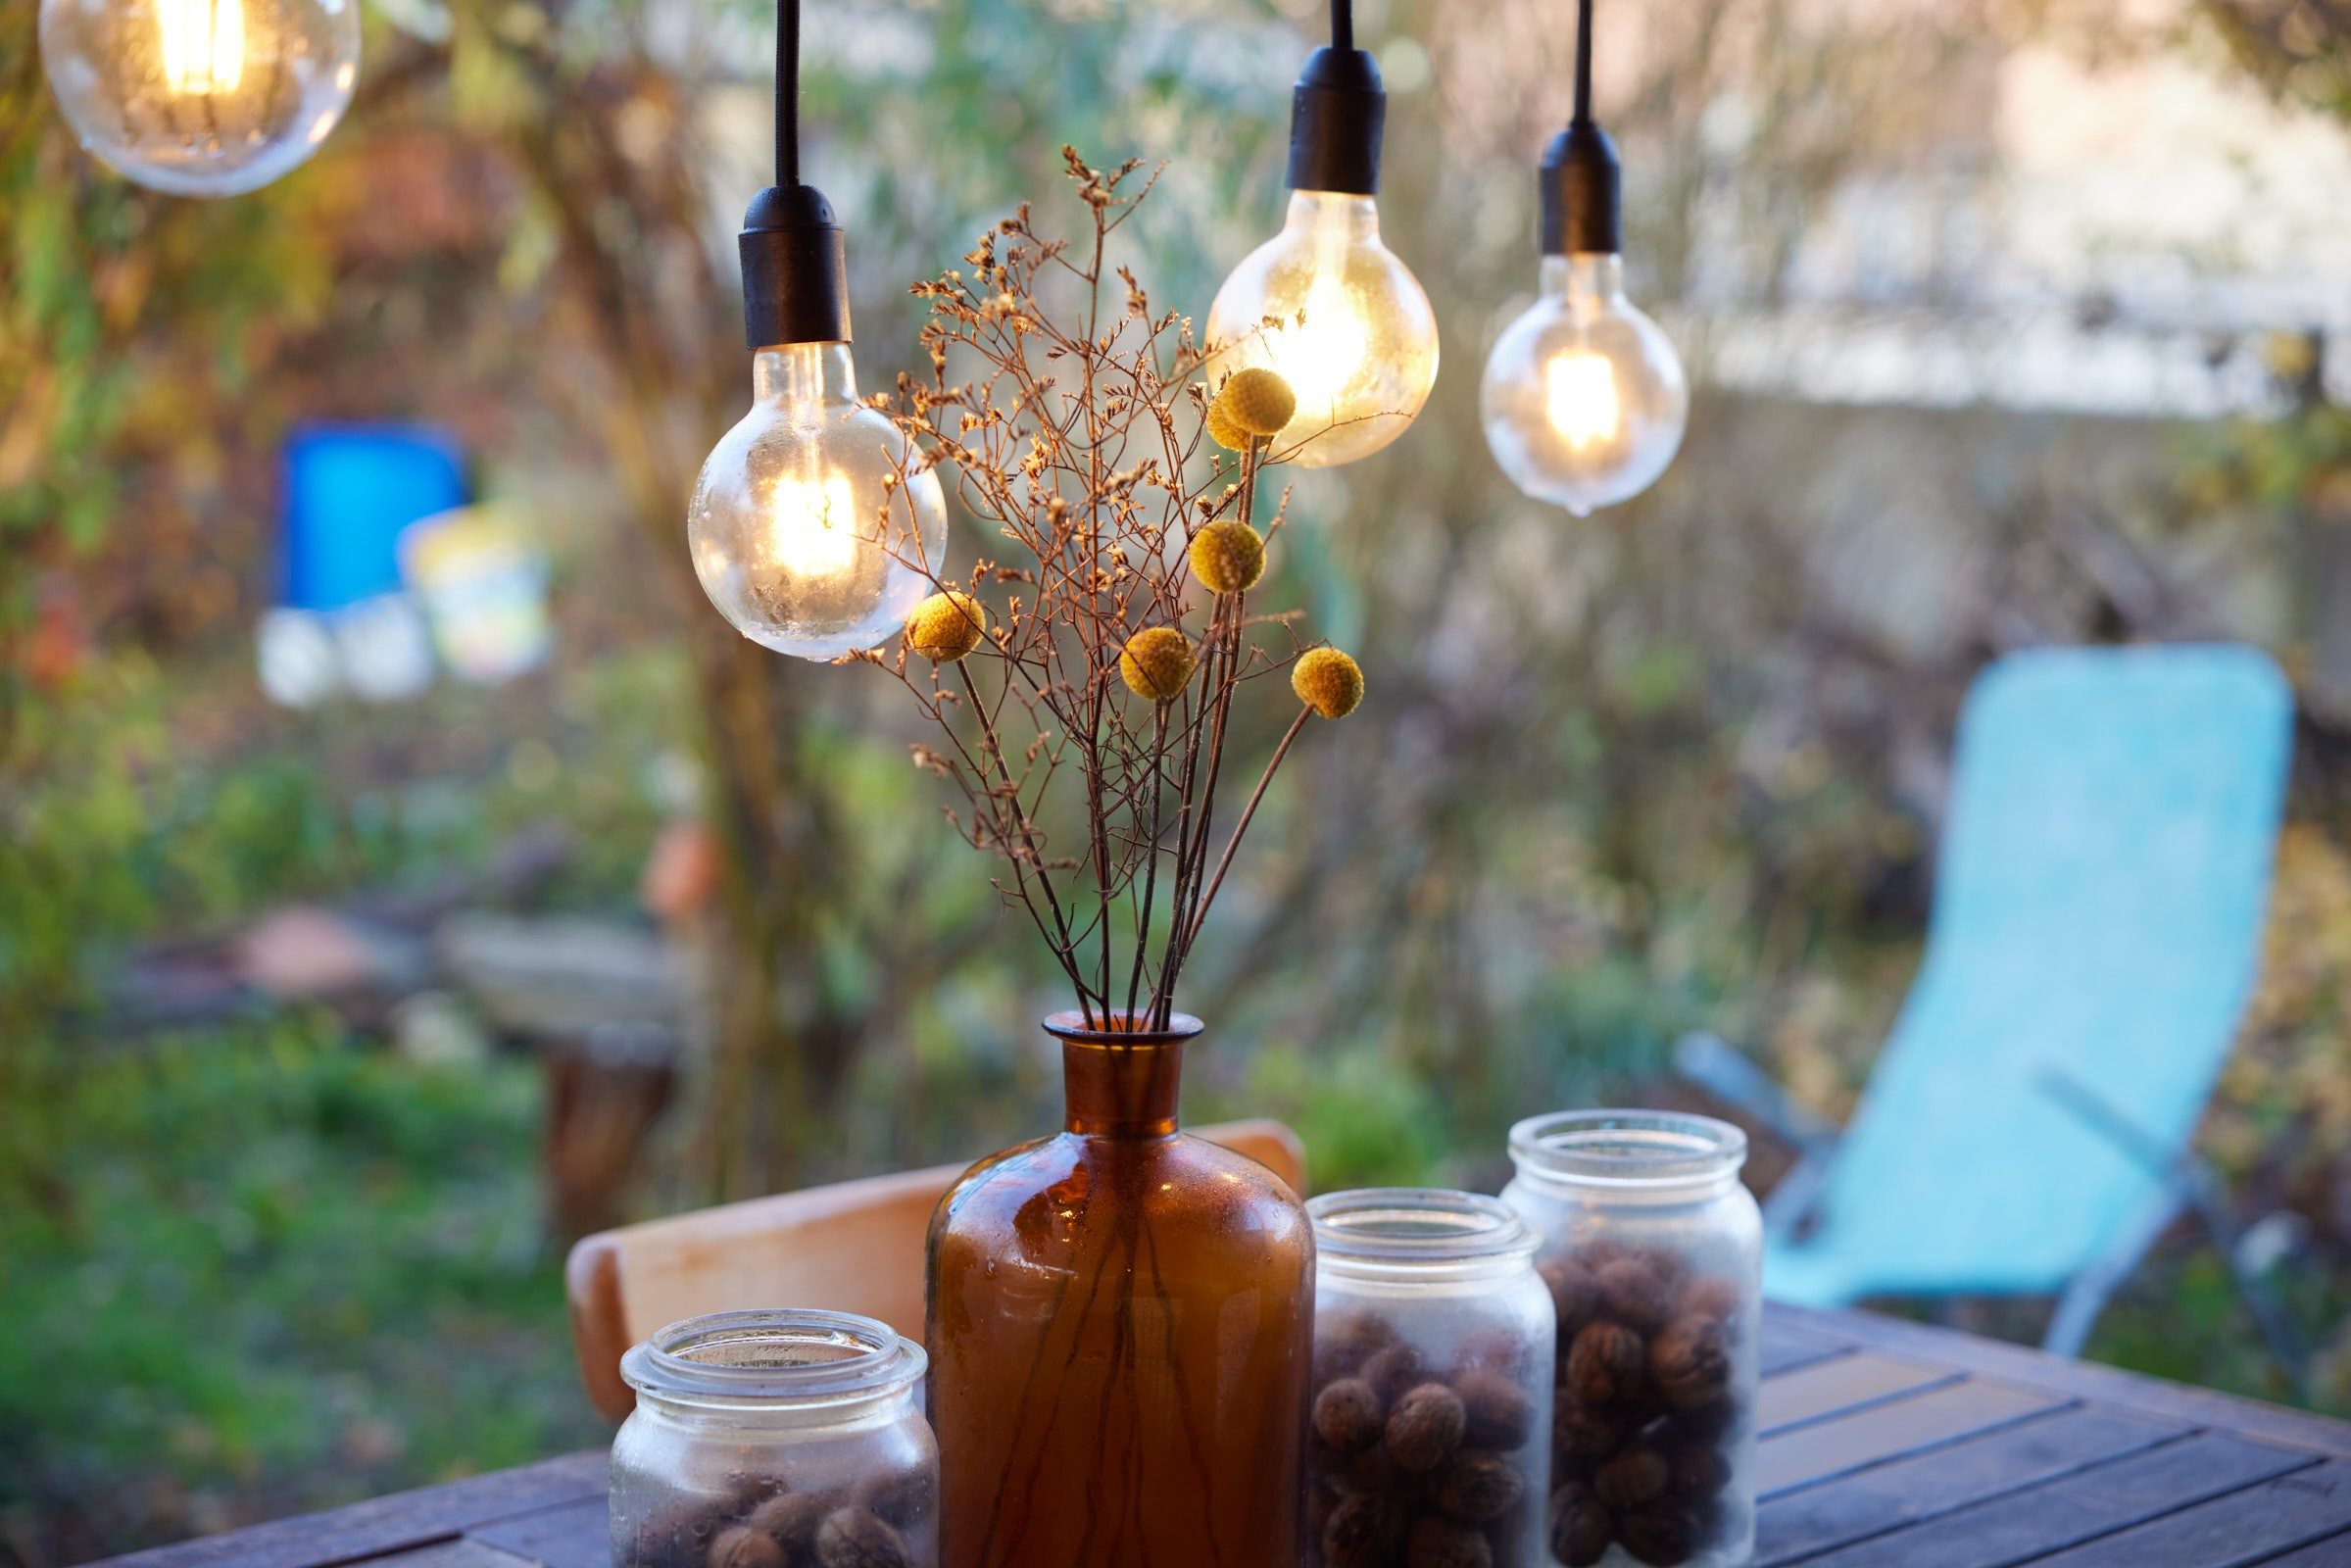 Three lamps hang over a beautifully decorated garden table